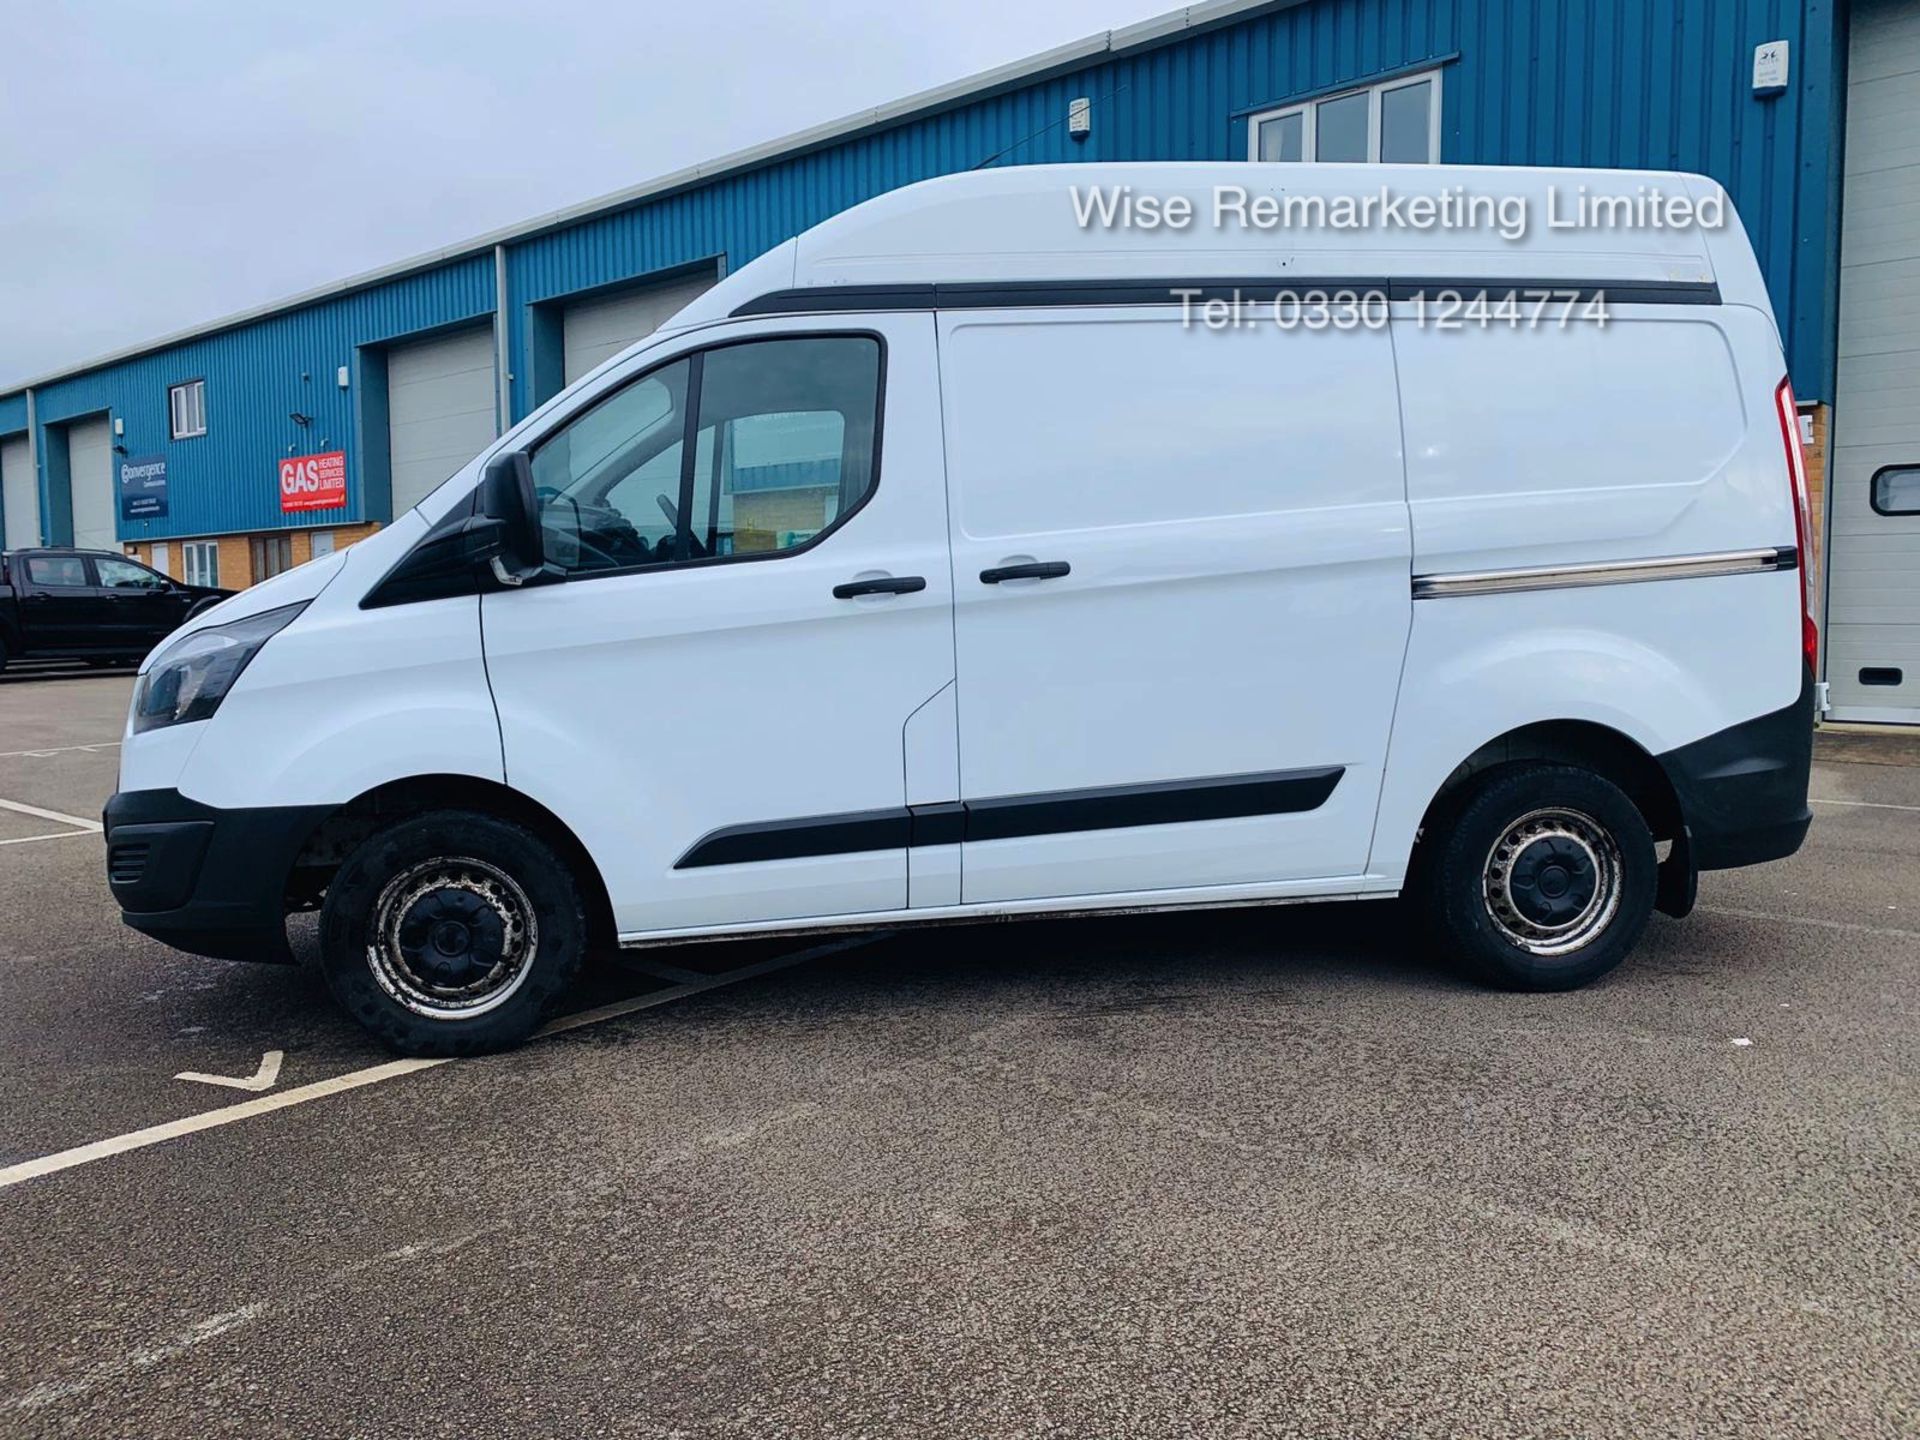 (RESERVE MET) Ford Transit Custom 2.2 TDCI 290 **HIGH ROOF** - 2016 Model - AIR CON- 1 OWNER- FSH- - Image 3 of 24